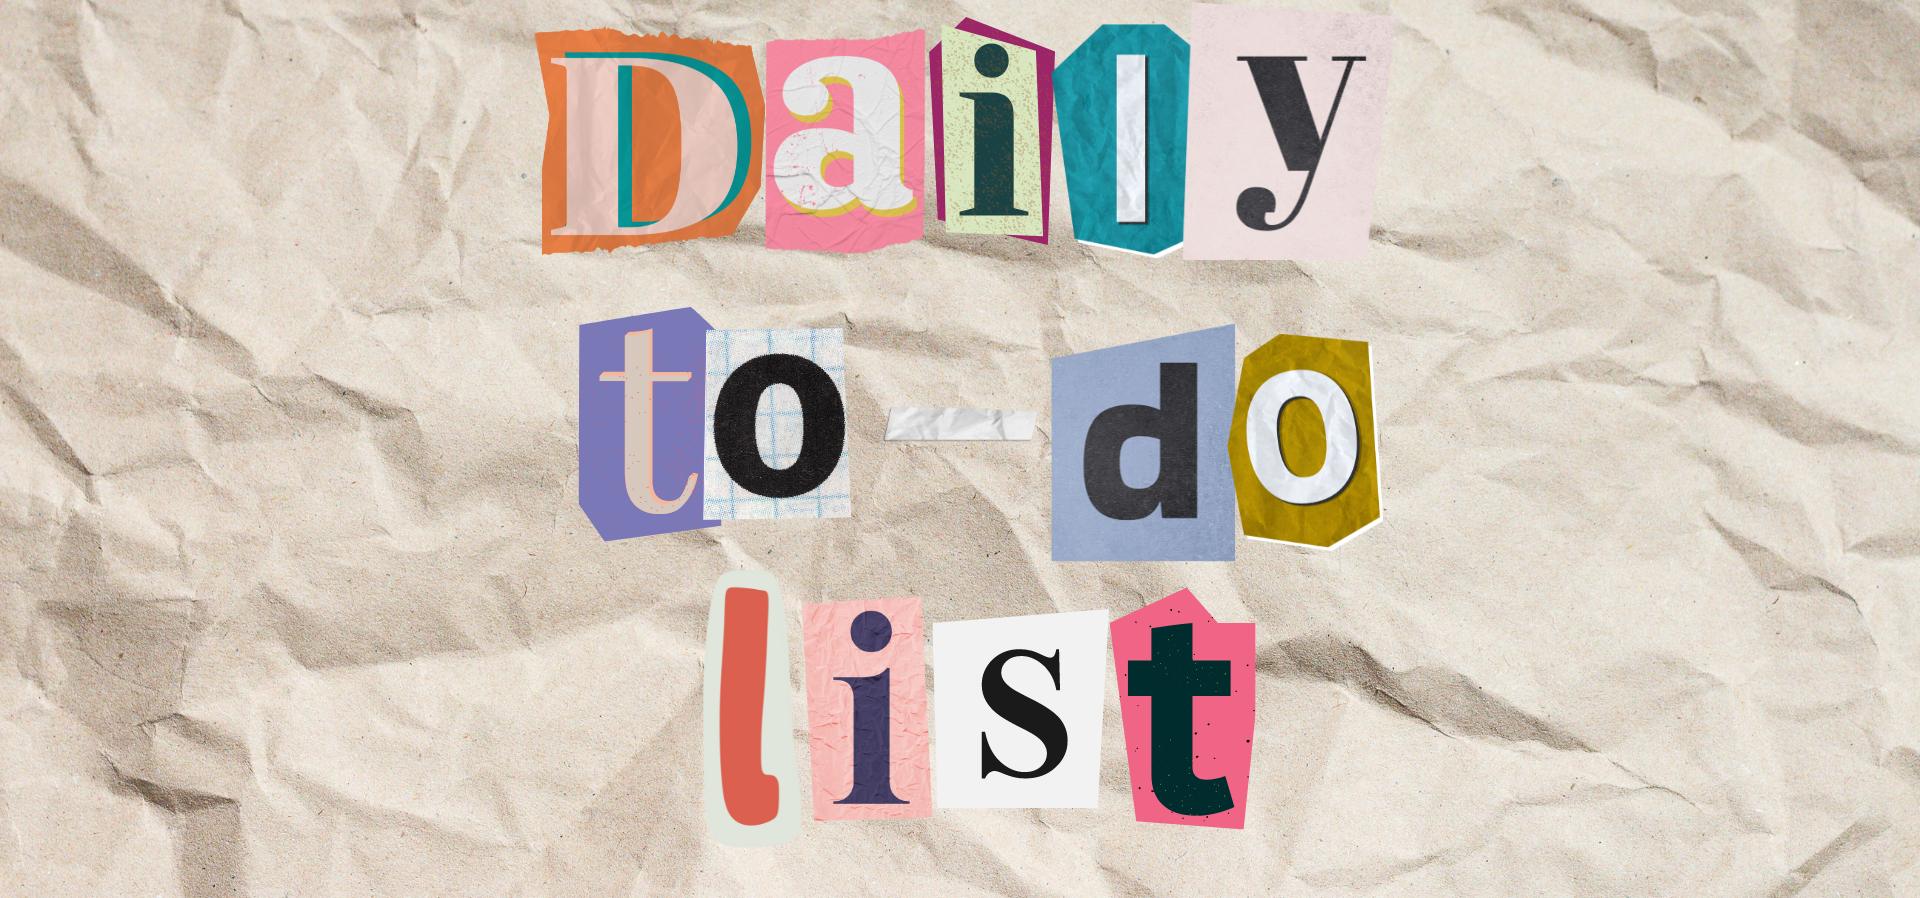 Cut-out letters on crumpled paper spelling &quot;Daily to do list&quot;